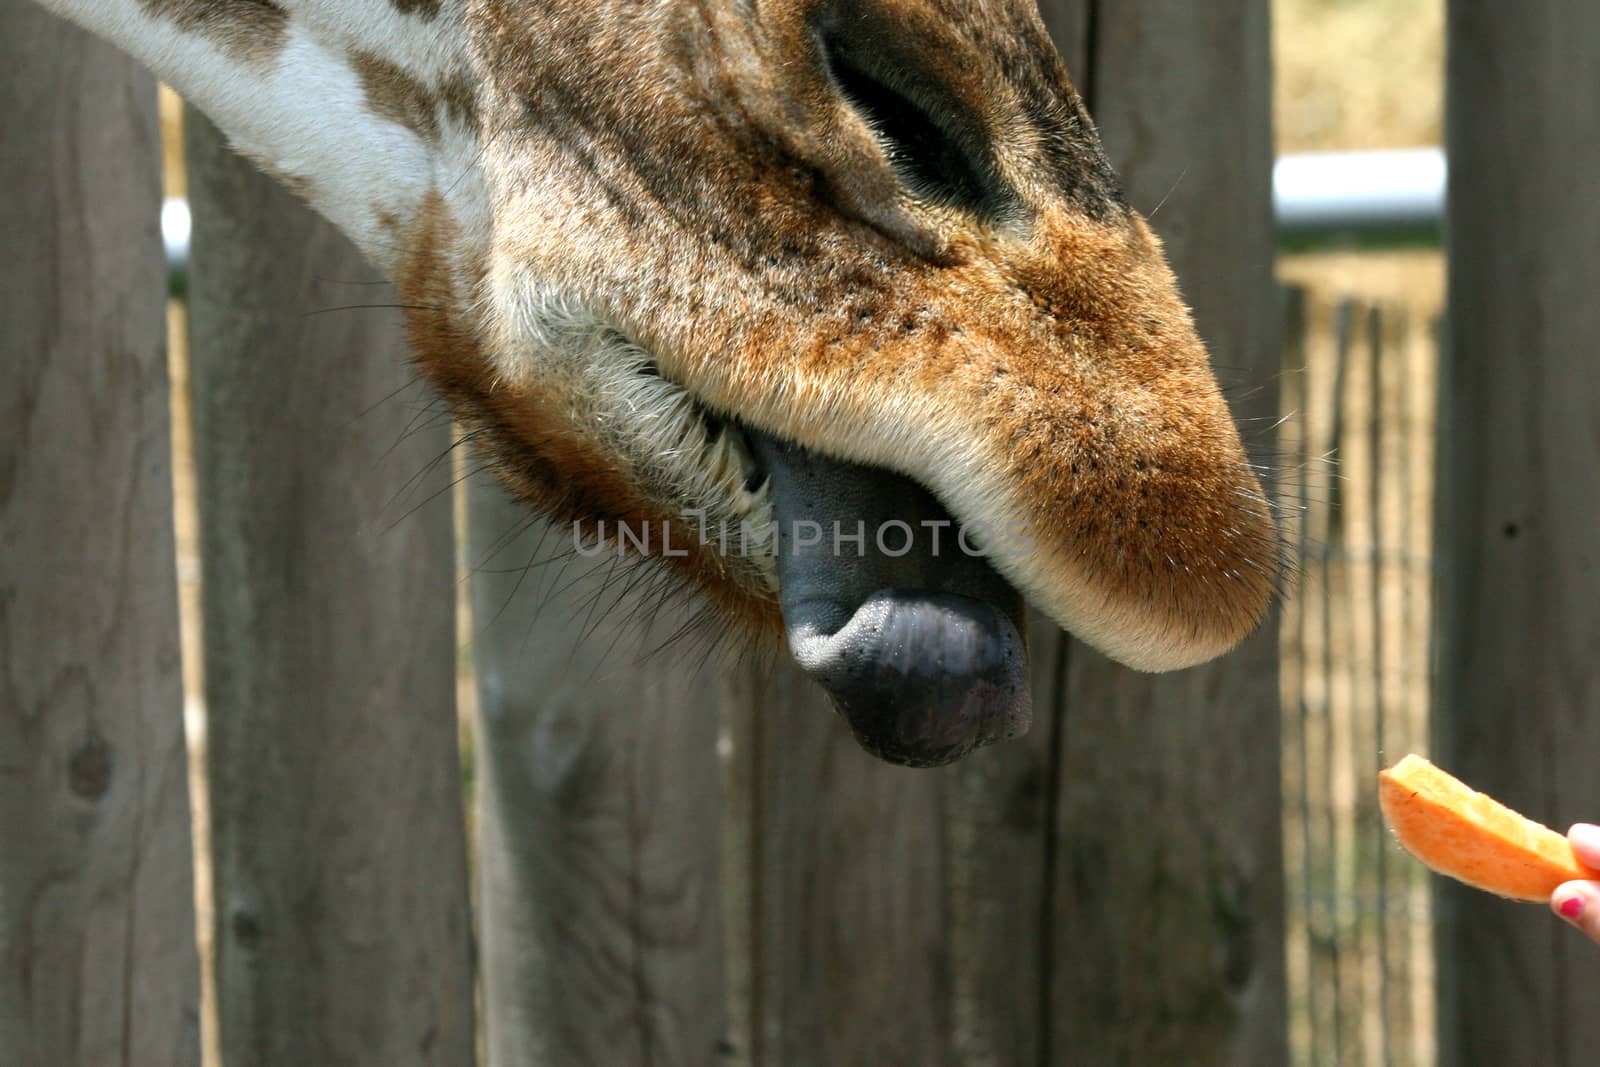 Image showing a giraffe sticking out its blue tongue taking a piece of carrot from its keeper.